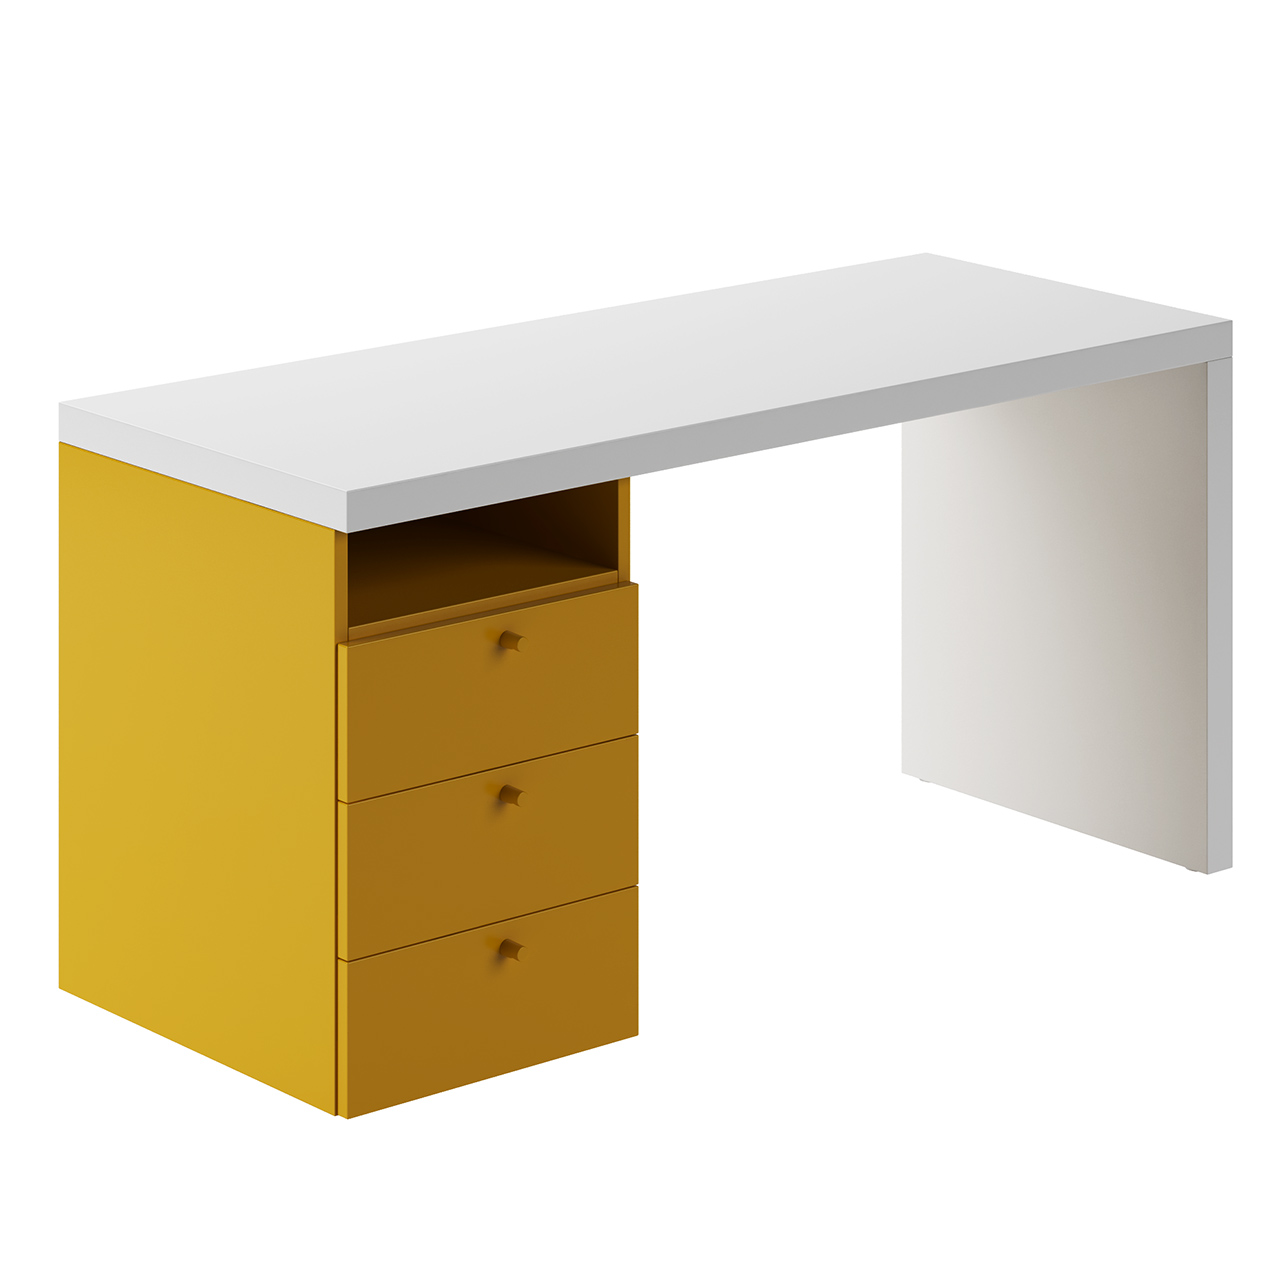 top-s21-desk-with-drawer-unit-by-nidi.jpg